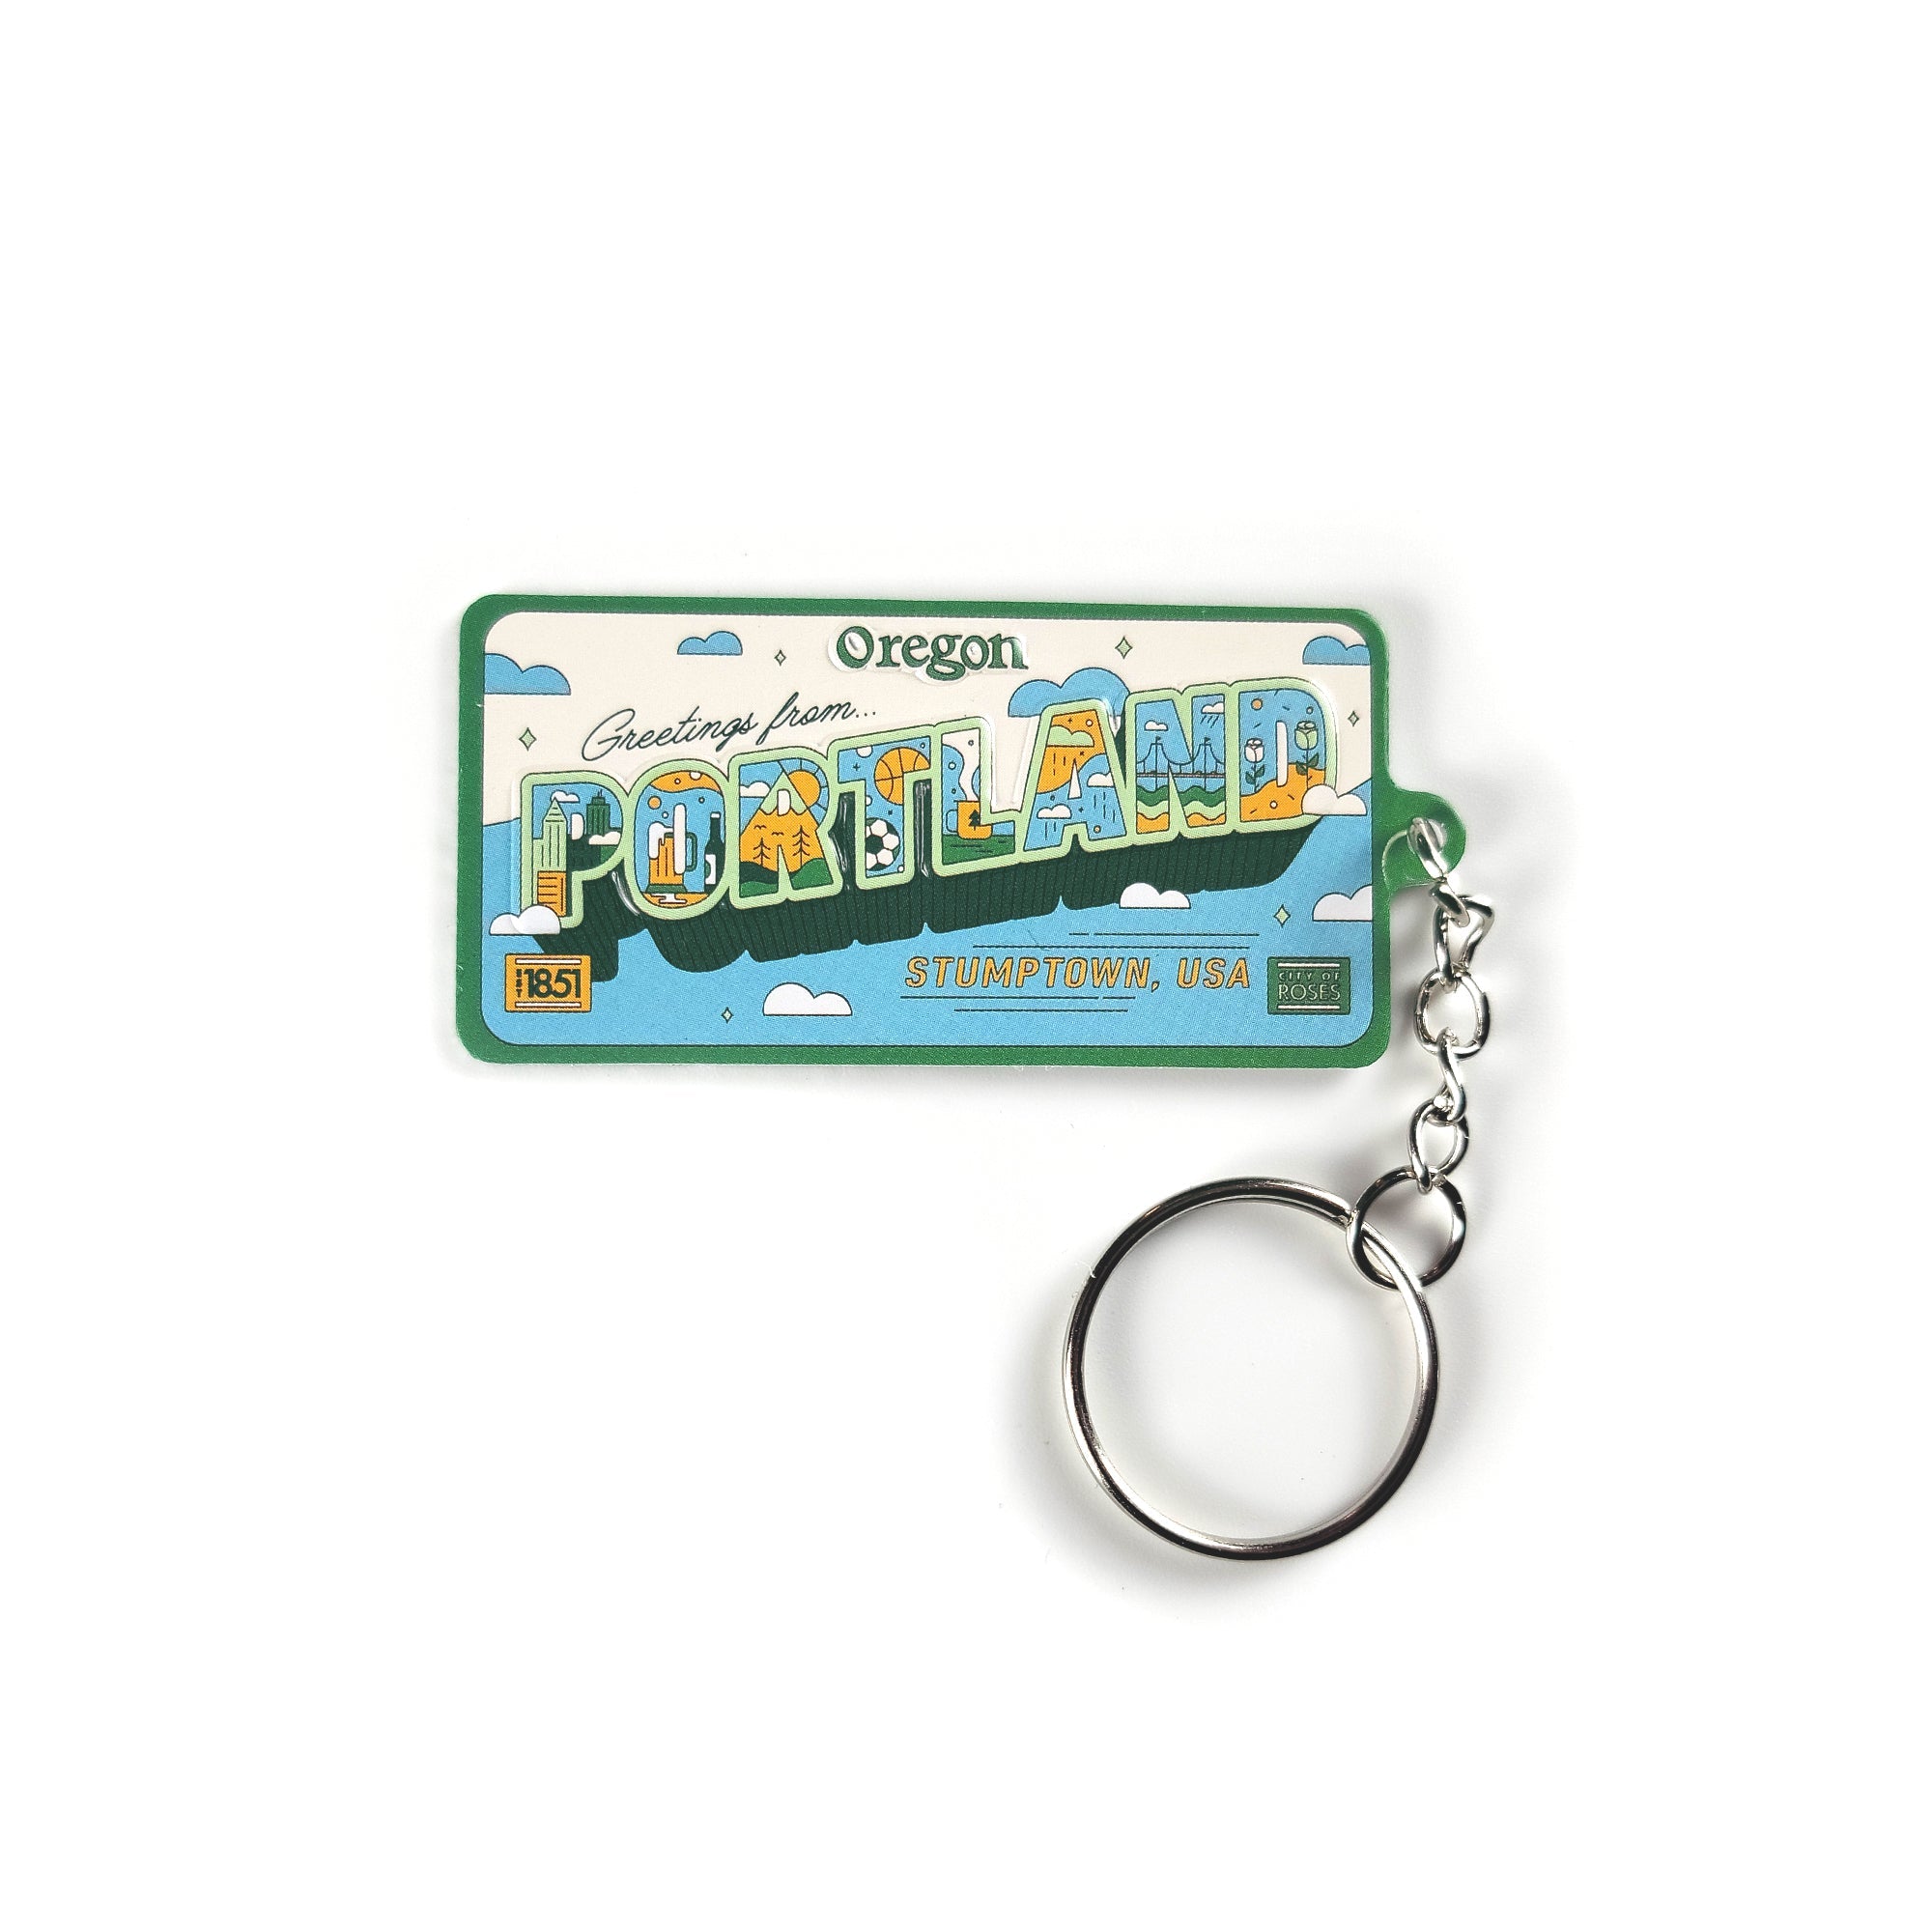 Greetings From Portland License Plate Keychain - Keychains - Hello From Oregon